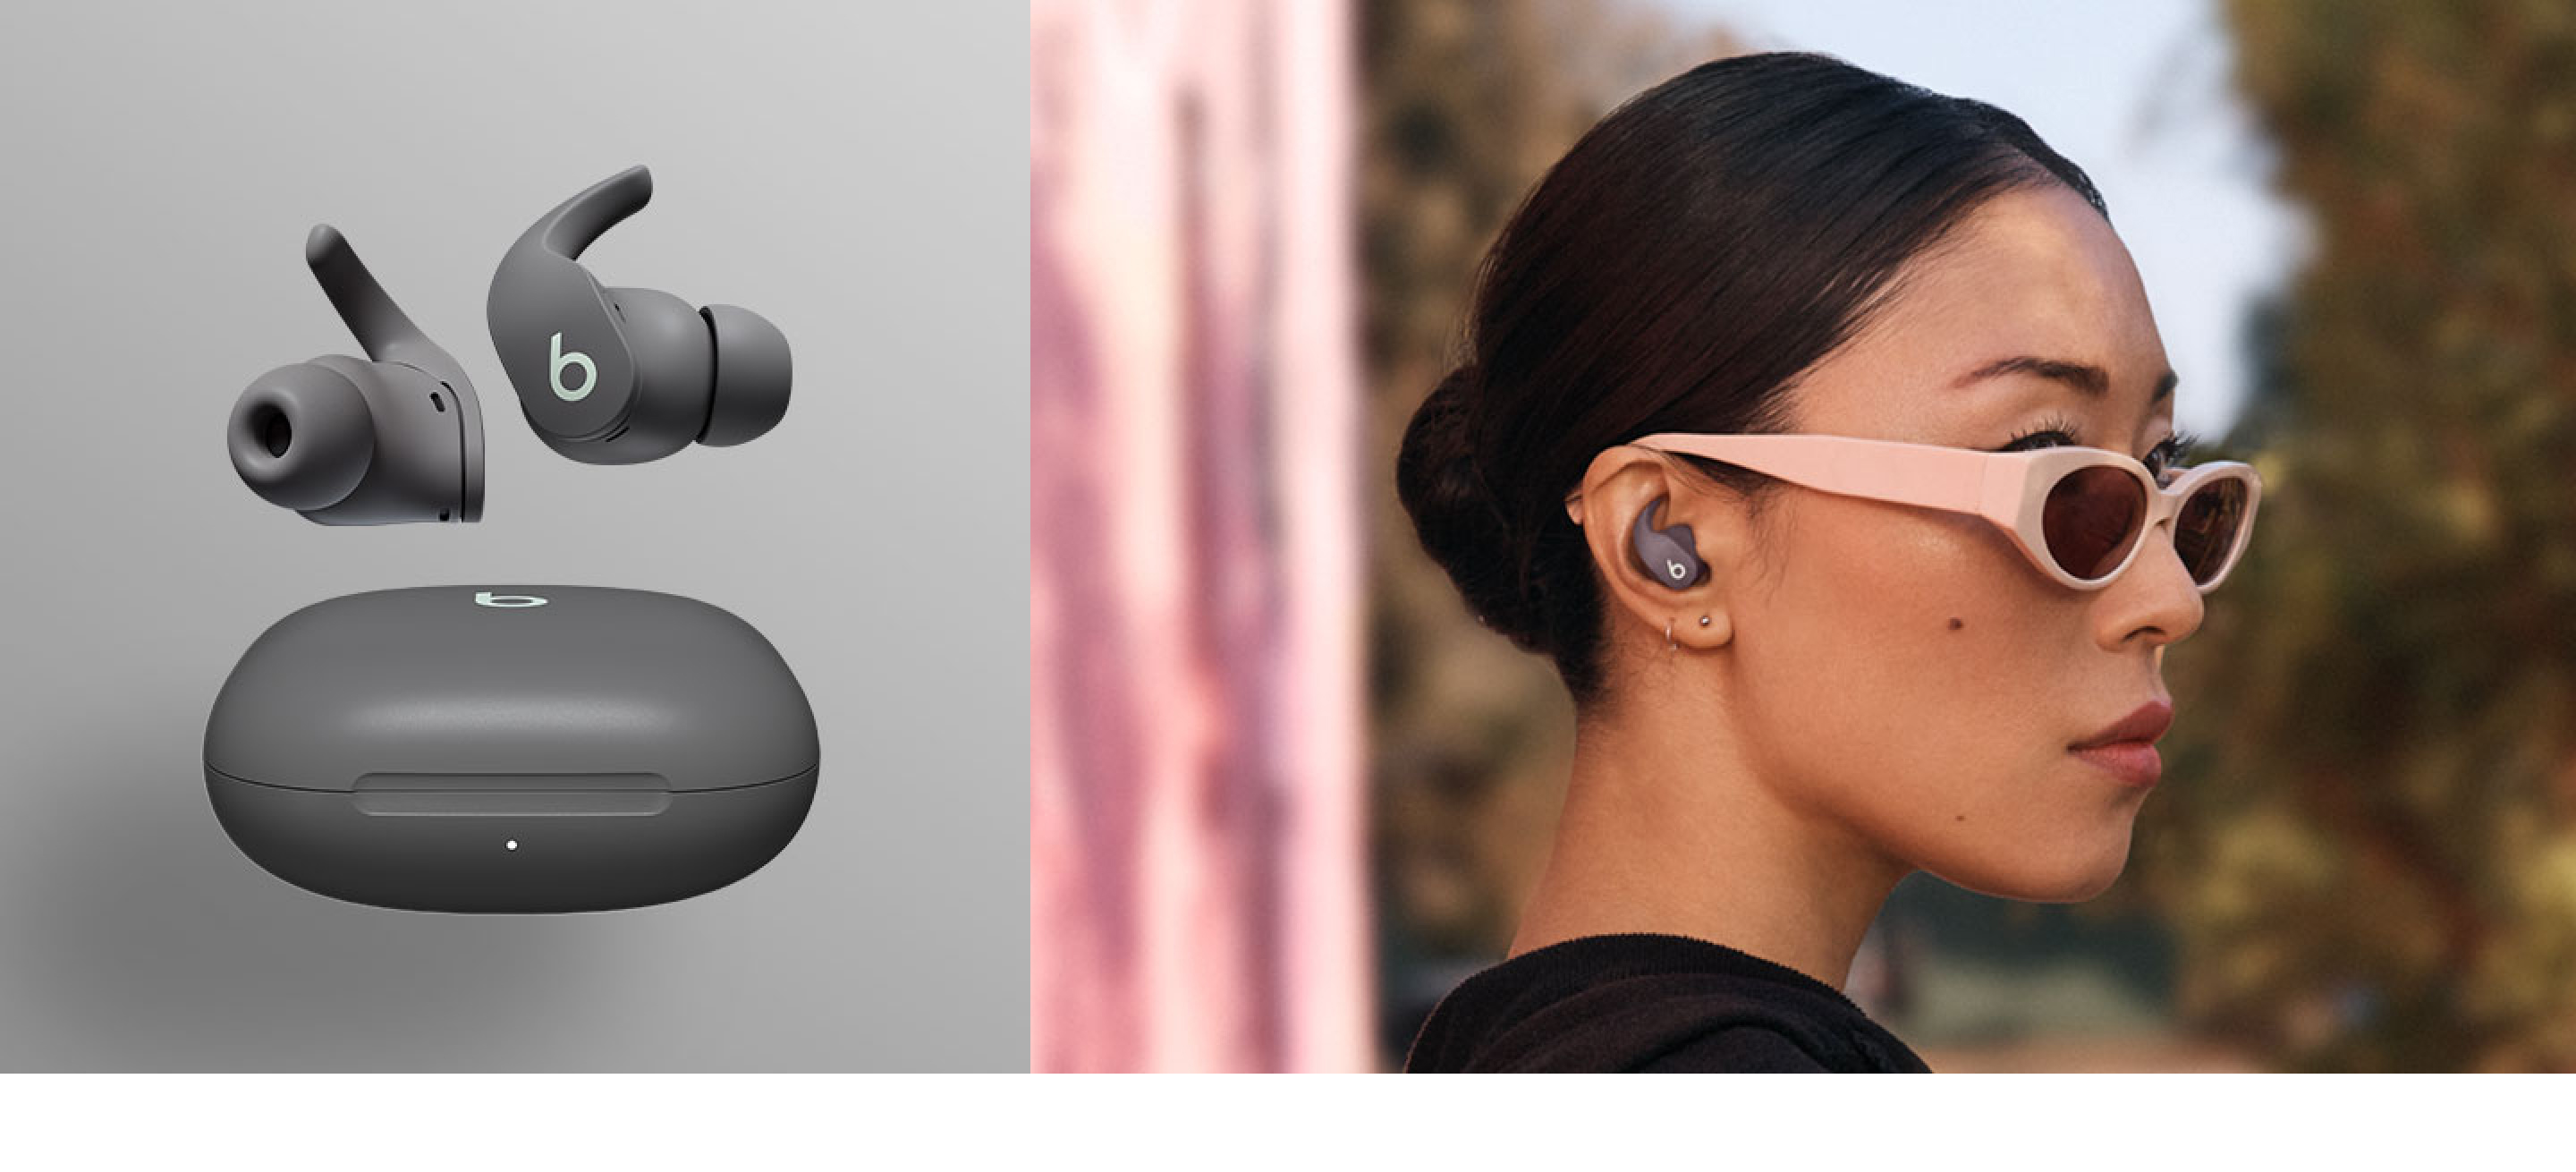  Beats Fit Pro - True Wireless Noise Cancelling Earbuds - Apple  H1 Headphone Chip, Compatible with Apple & Android, Class 1 Bluetooth,  Built-in Microphone, 6 Hours of Listening Time - Stone Purple : Electronics